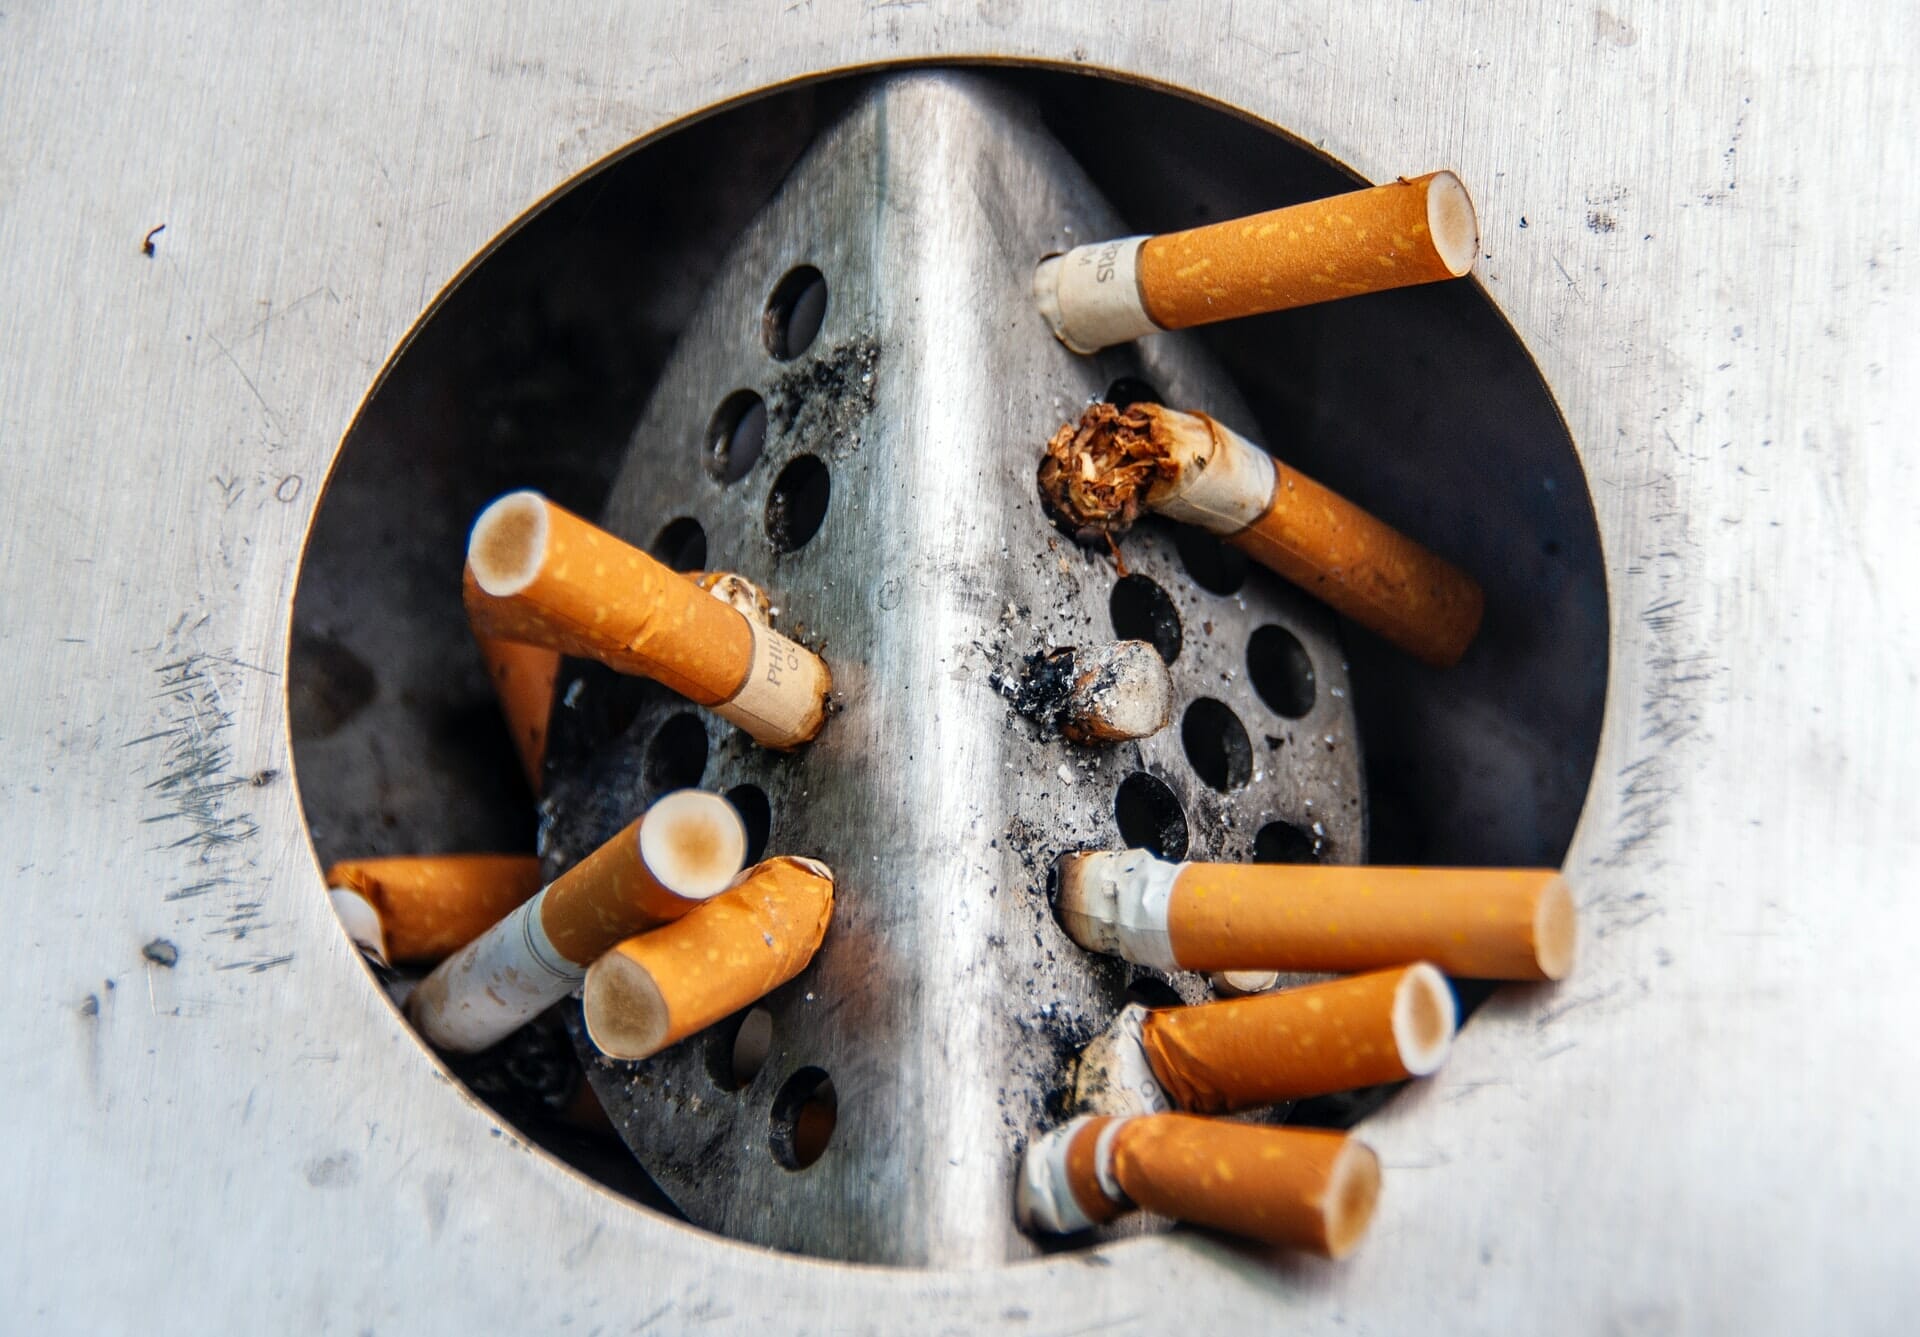 Smokeless-Tobacco-Leaves-Traces-Carcinogens